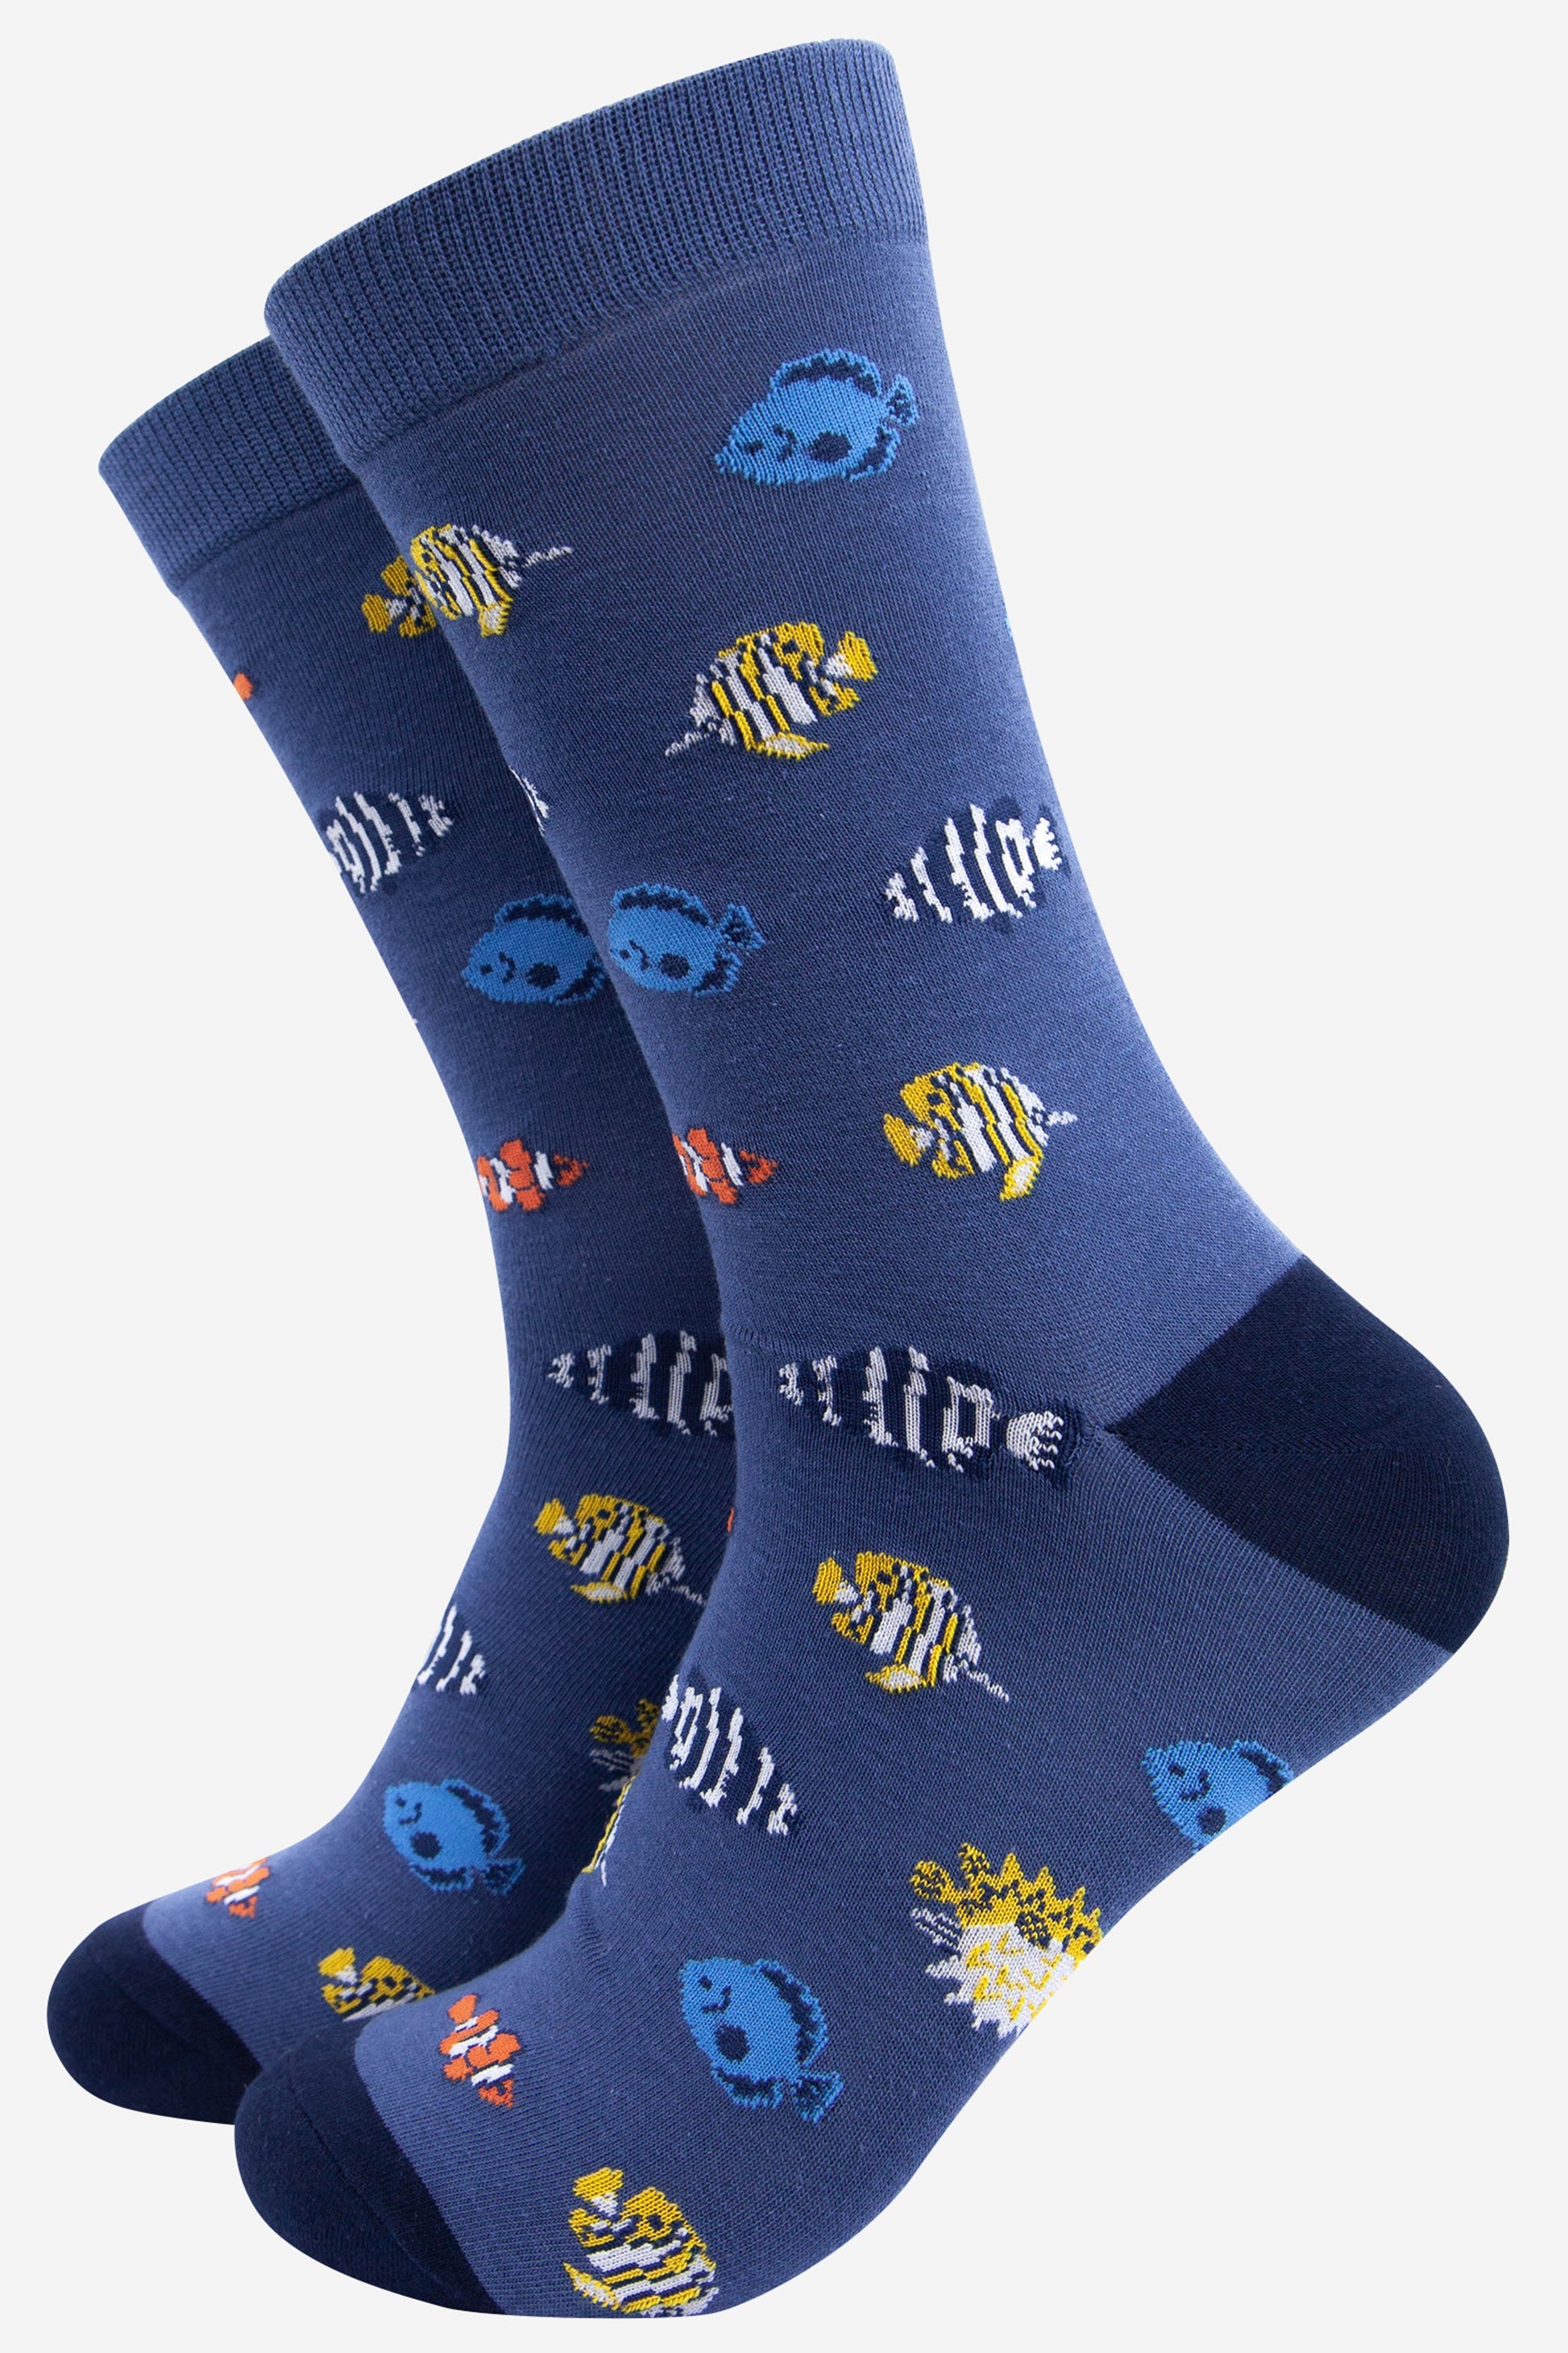 blue bamboo socks with an all over pattern of colourful tropical fish